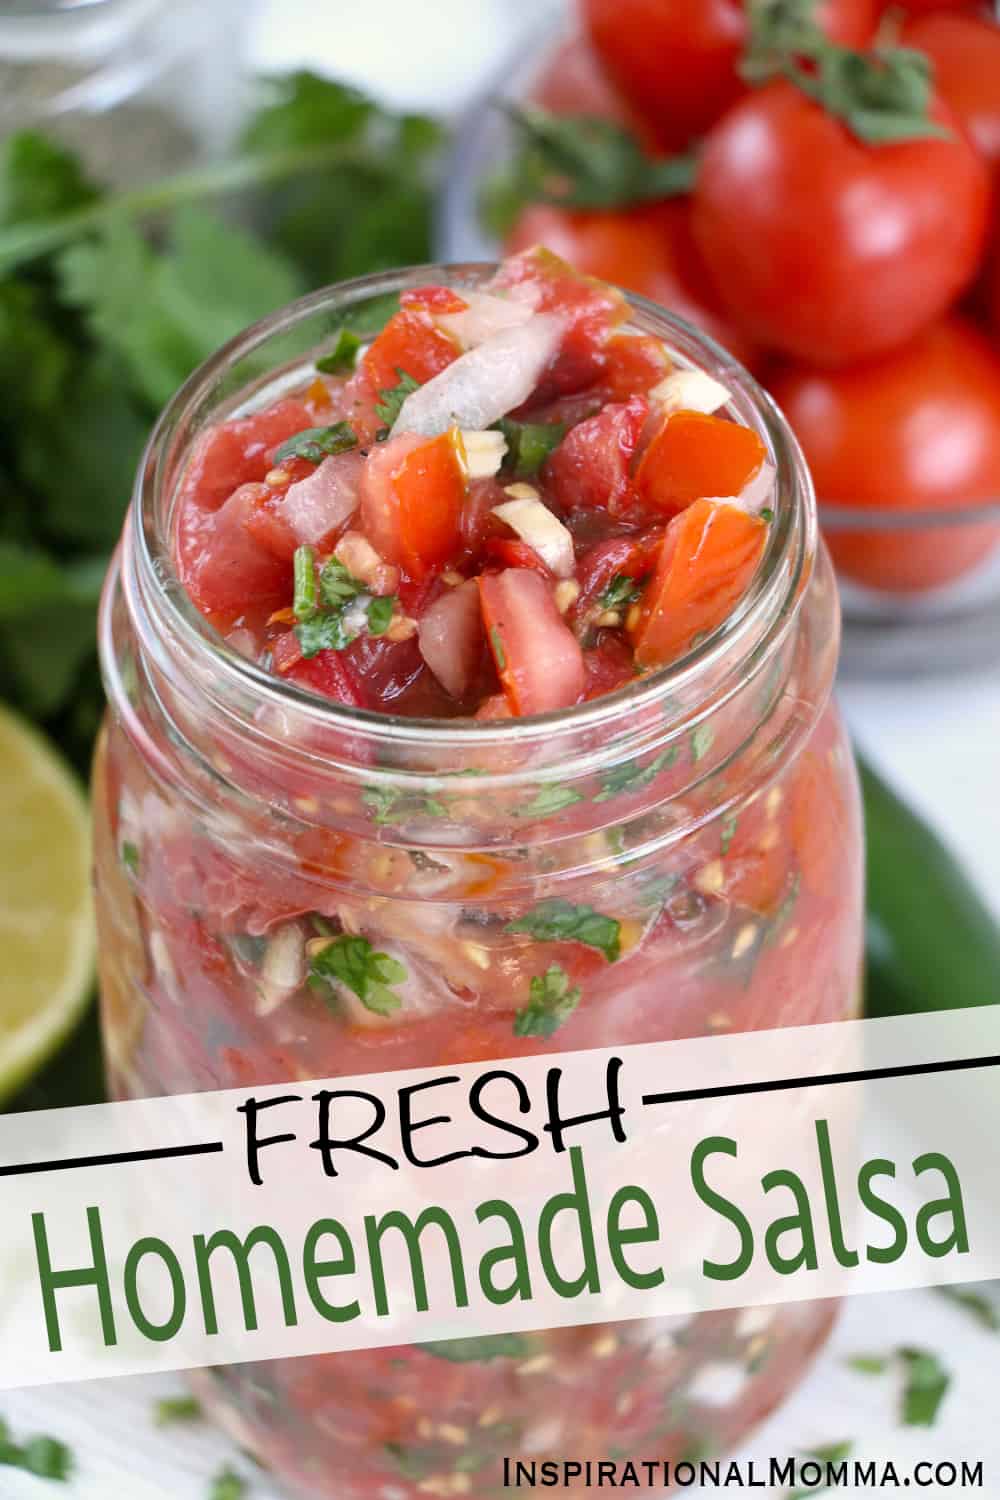 Fresh Homemade Salsa is easy and delicious. It is made with flavorful tomatoes, cilantro, onions, jalapeños, and garlic. #inspirationalmomma #freshhomemadesalsa #homemadesalsa #freshsalsa #homemade #salsa #salsarecipe #recipe 